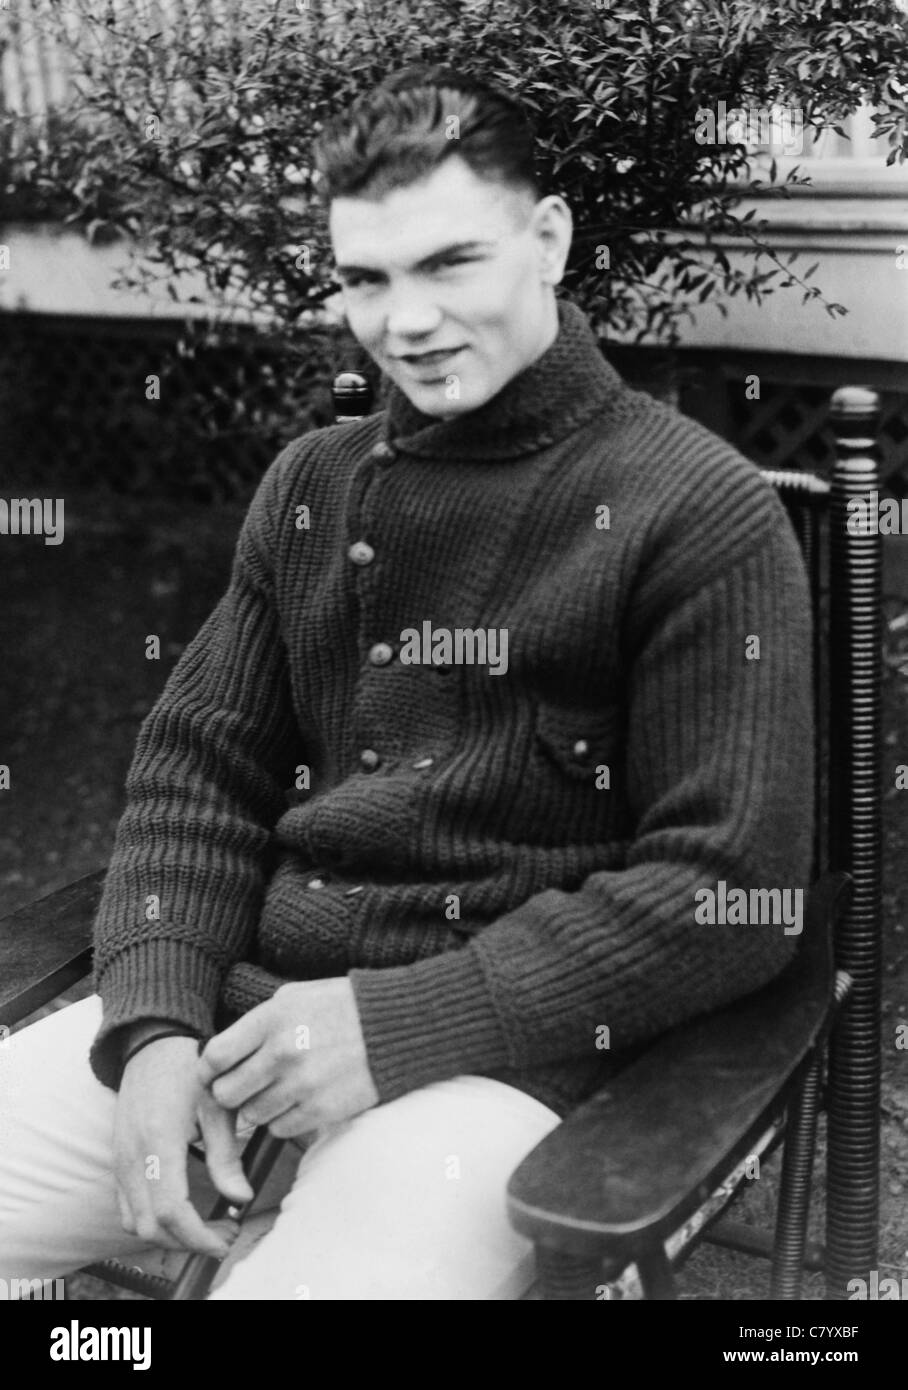 Vintage photo of boxer Jack Dempsey (1895 – 1983) – Dempsey, known as “The Manassa Mauler”, was World Heavyweight Champion from 1919 to 1926. Photo circa 1920 – 1925. Stock Photo